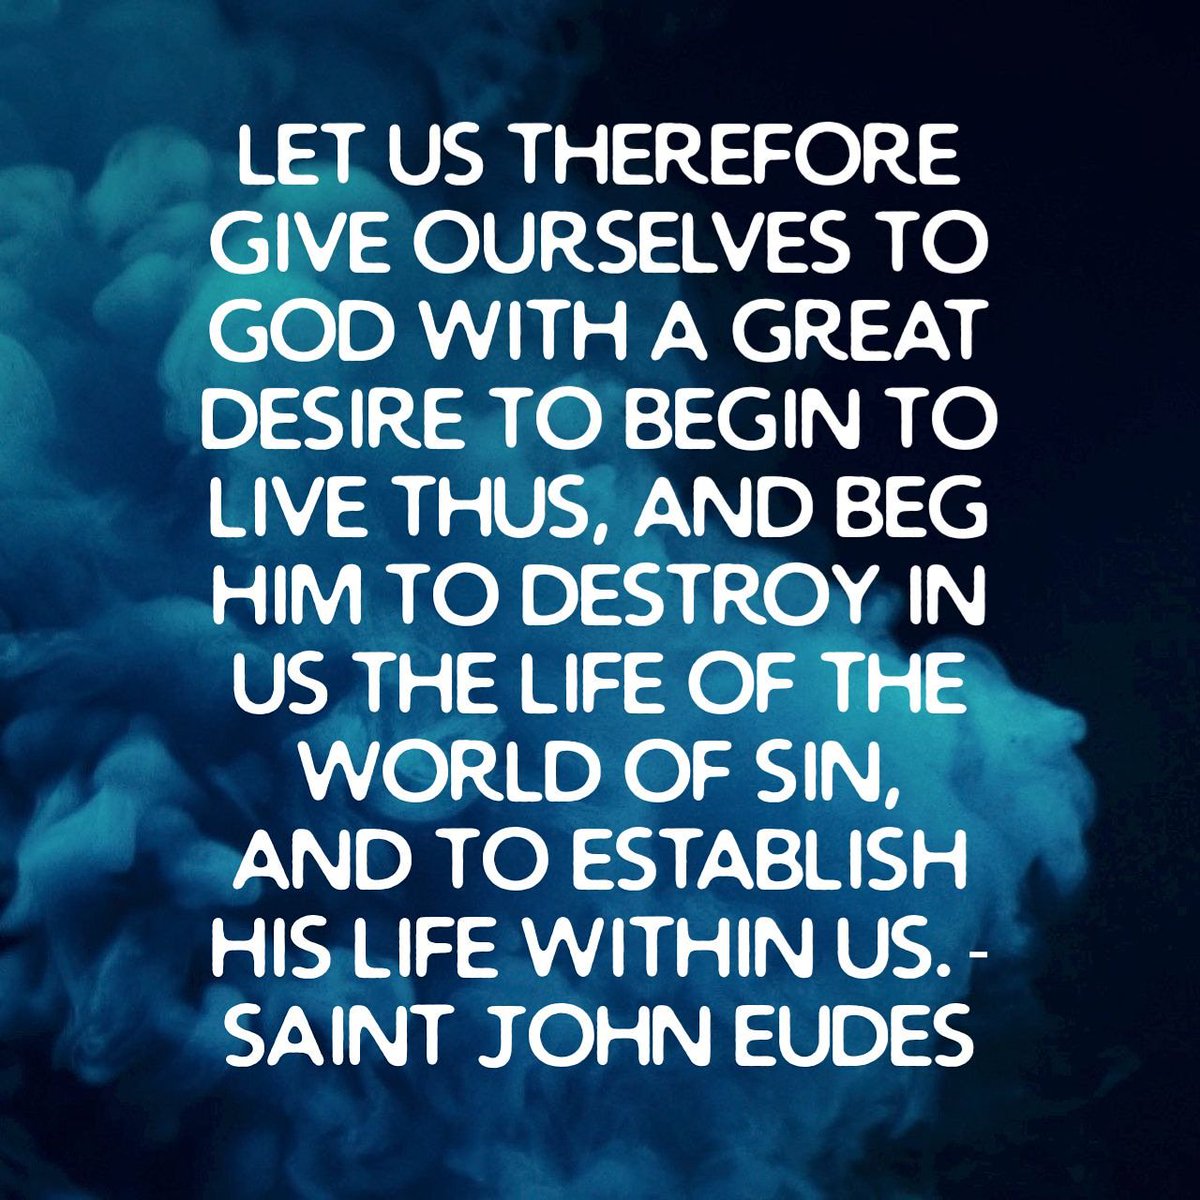 Let us therefore give ourselves to God with a great desire to begin to live thus, and beg Him to destroy in us the life of the world of sin, and to establish His life within us. - Saint John Eudes
#SayingsOfTheSaints 
#SaintOfTheDay 
#SaintJohnEudes
bibleversesonjesus.blogspot.com